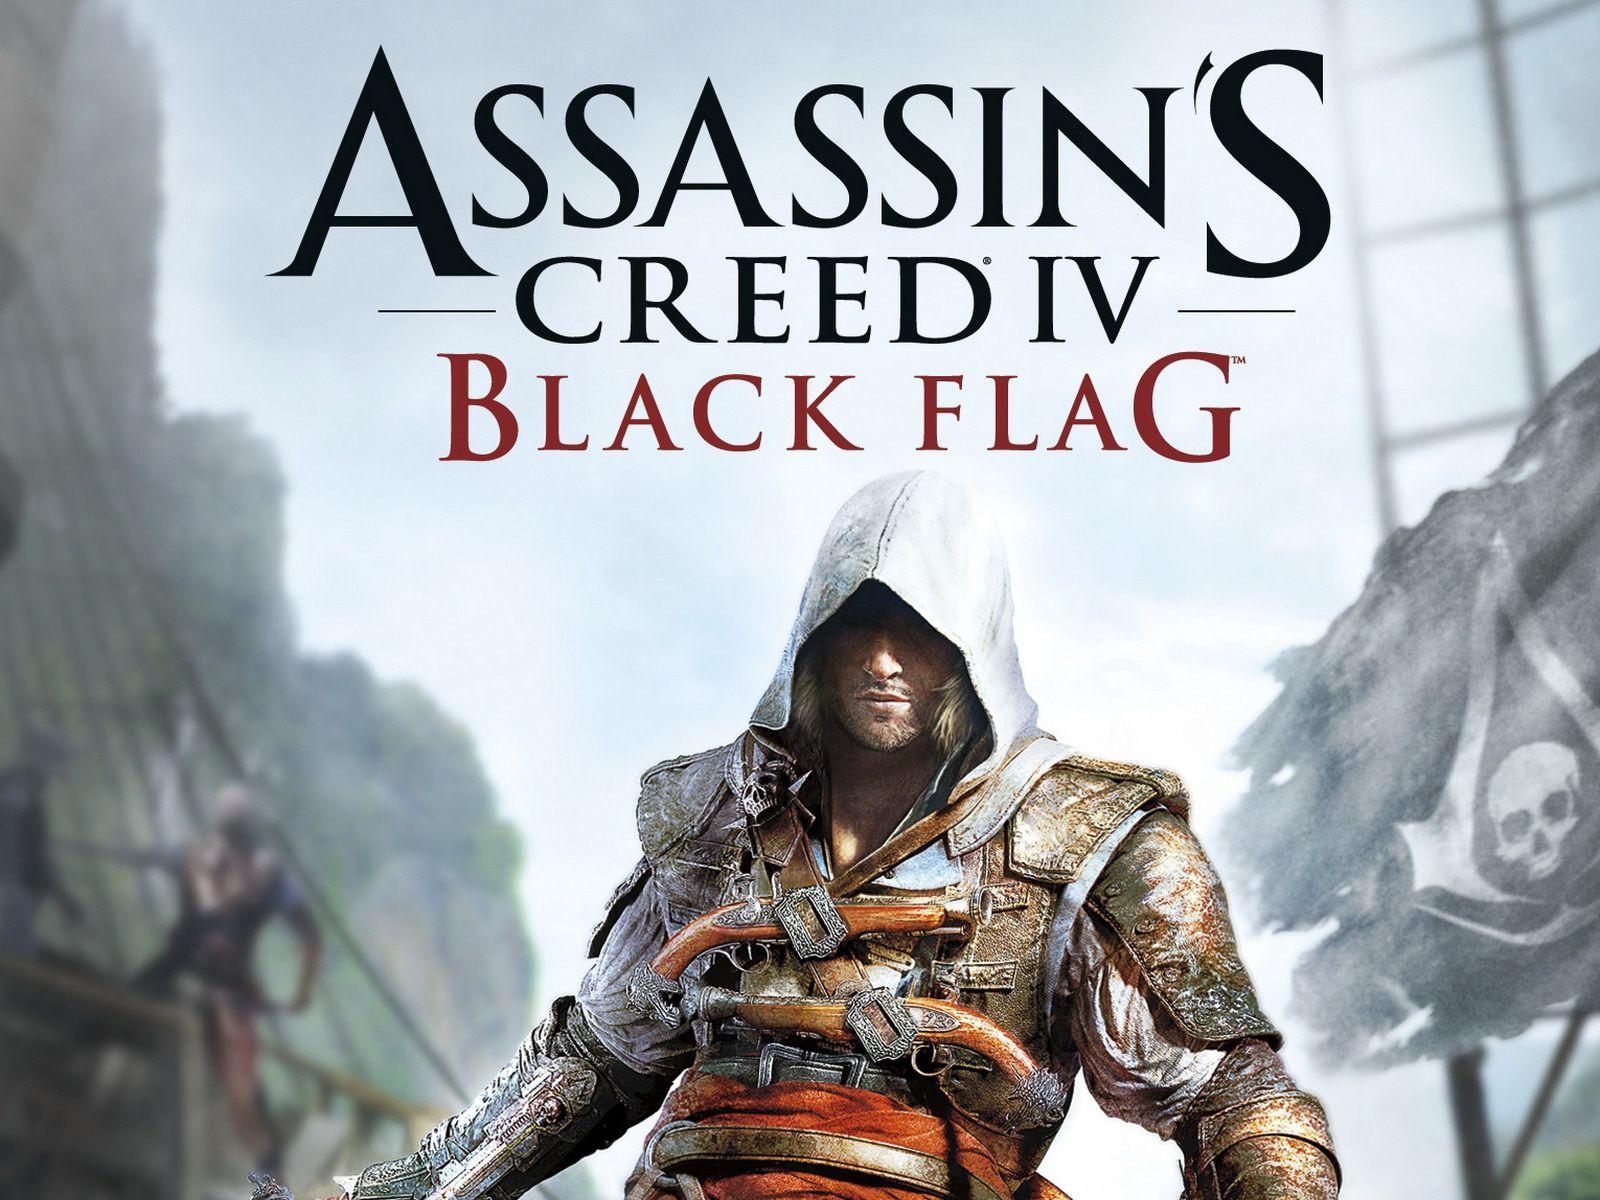 Download Latest Free Assassins Creed IV Black Flag HD Widescreen